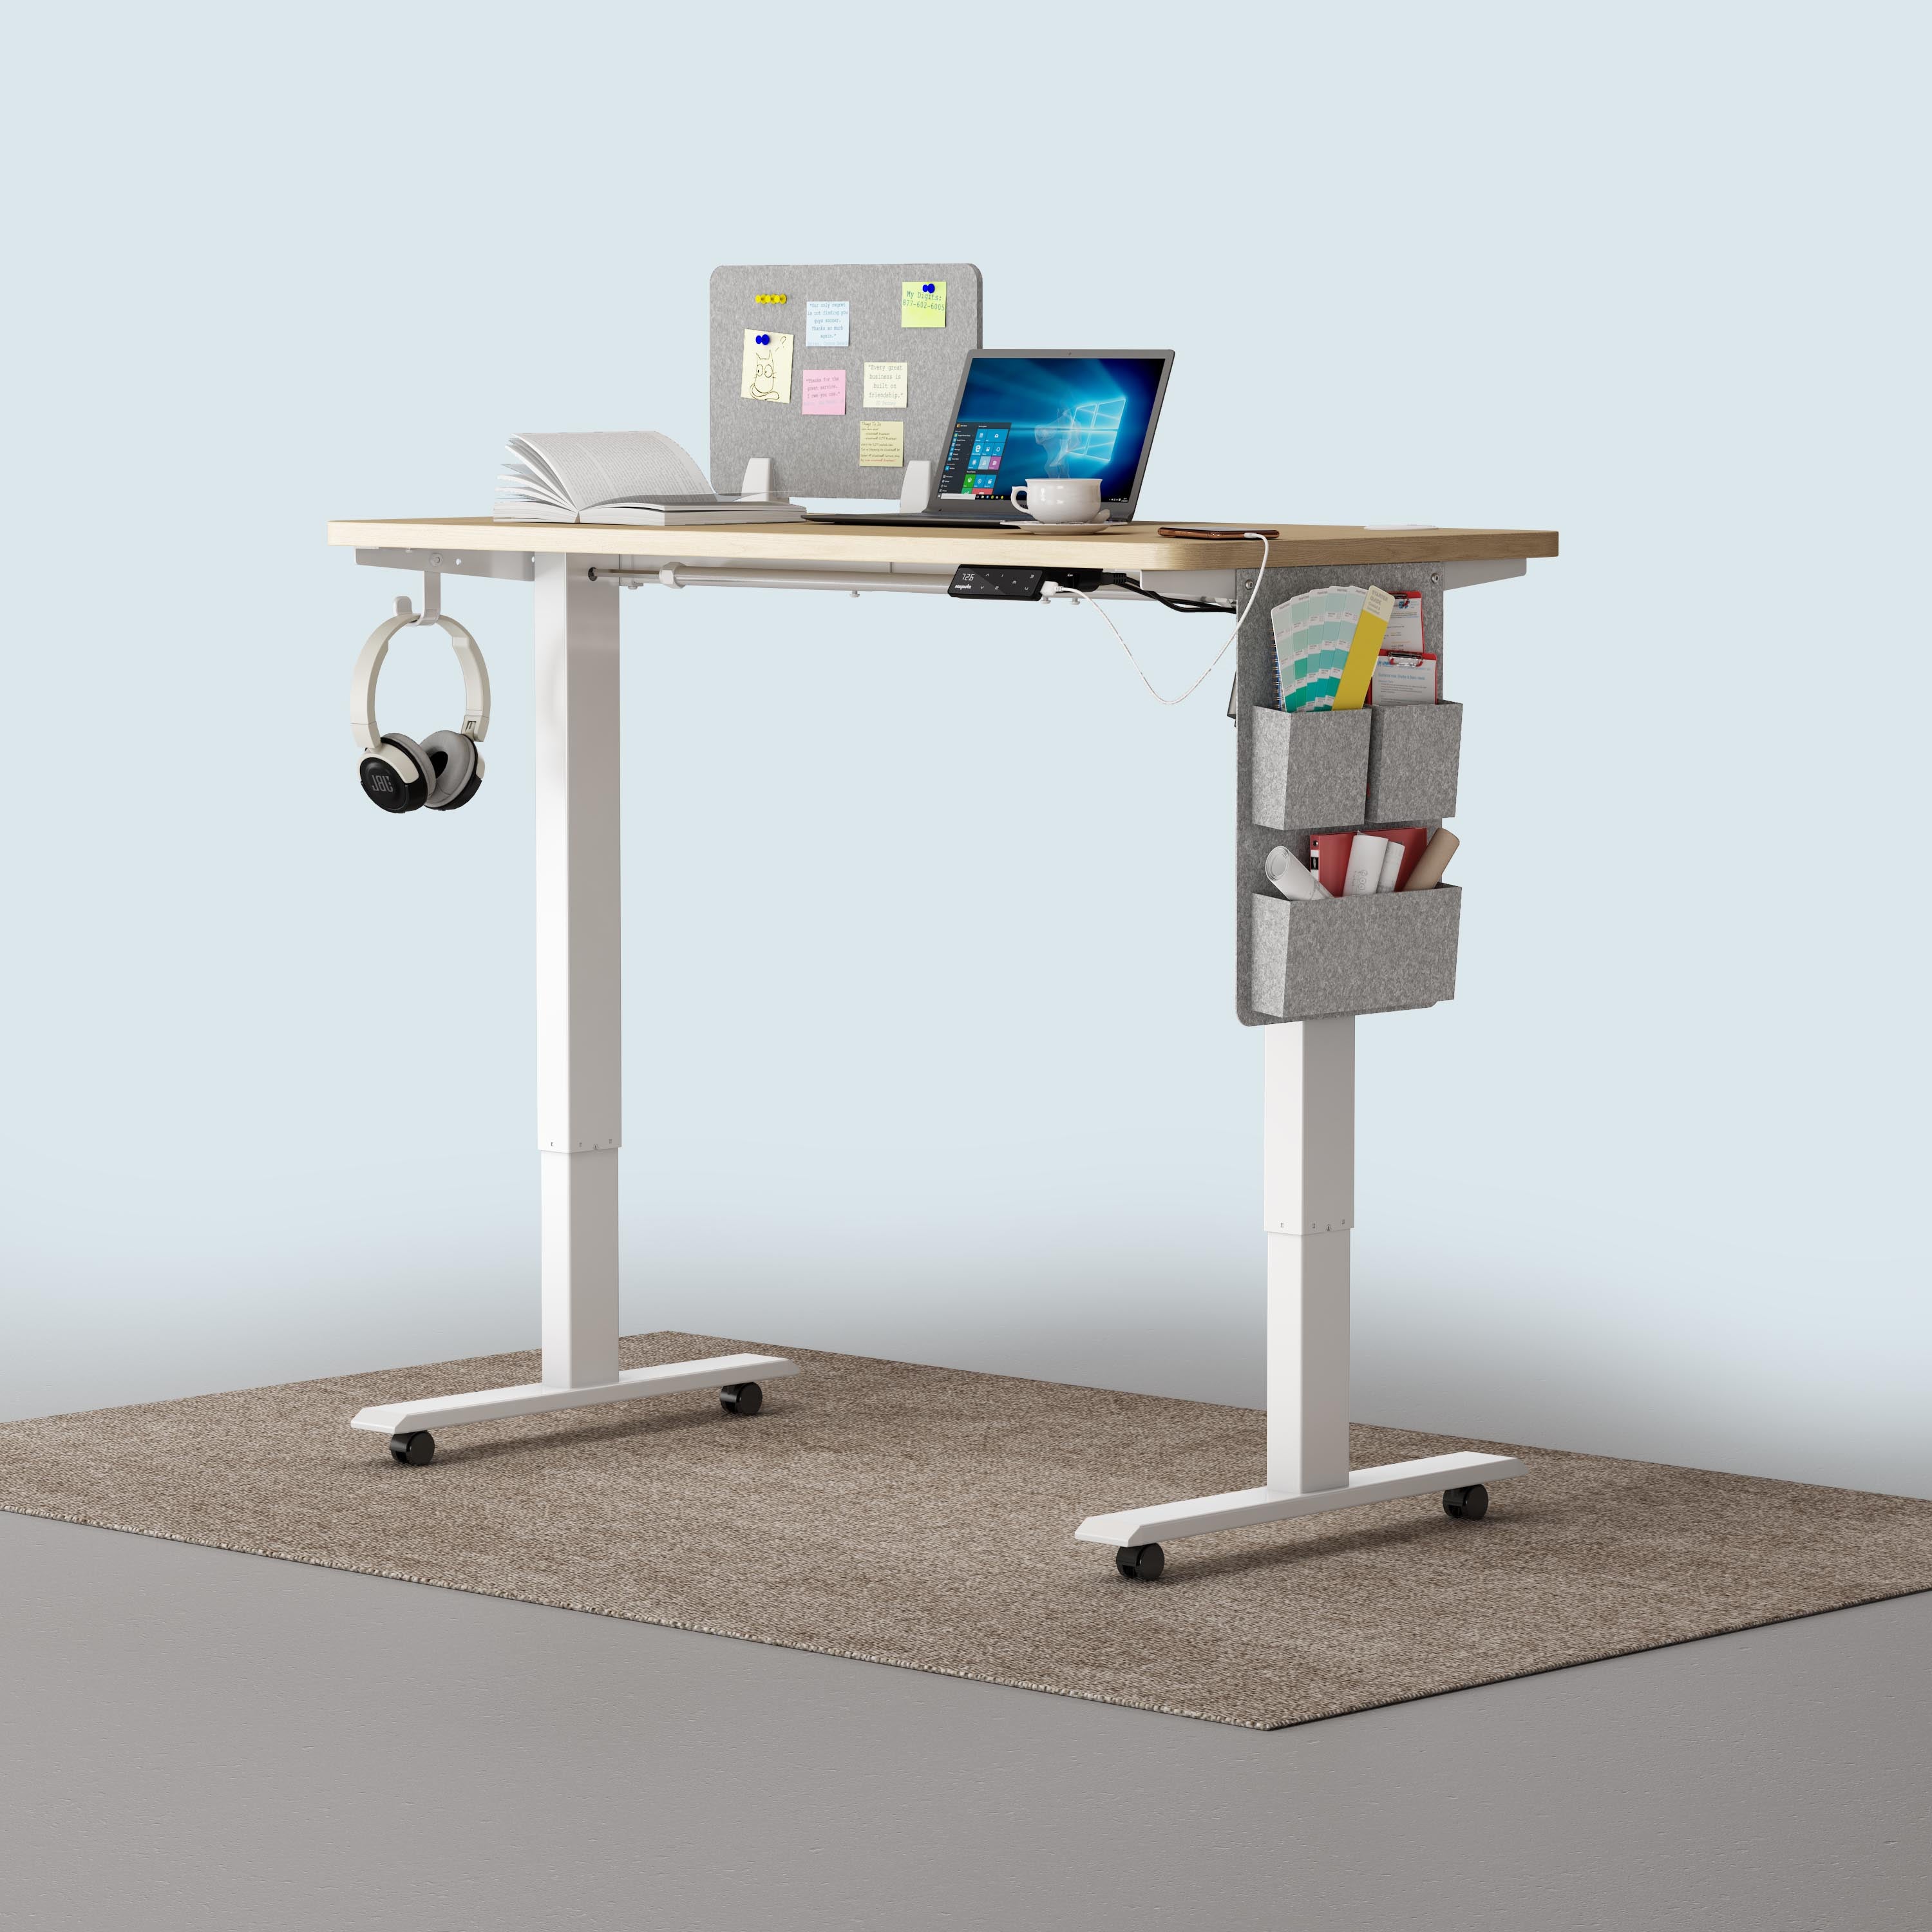 SN1 height adjustable desk 100x60cm for sit and stand at working